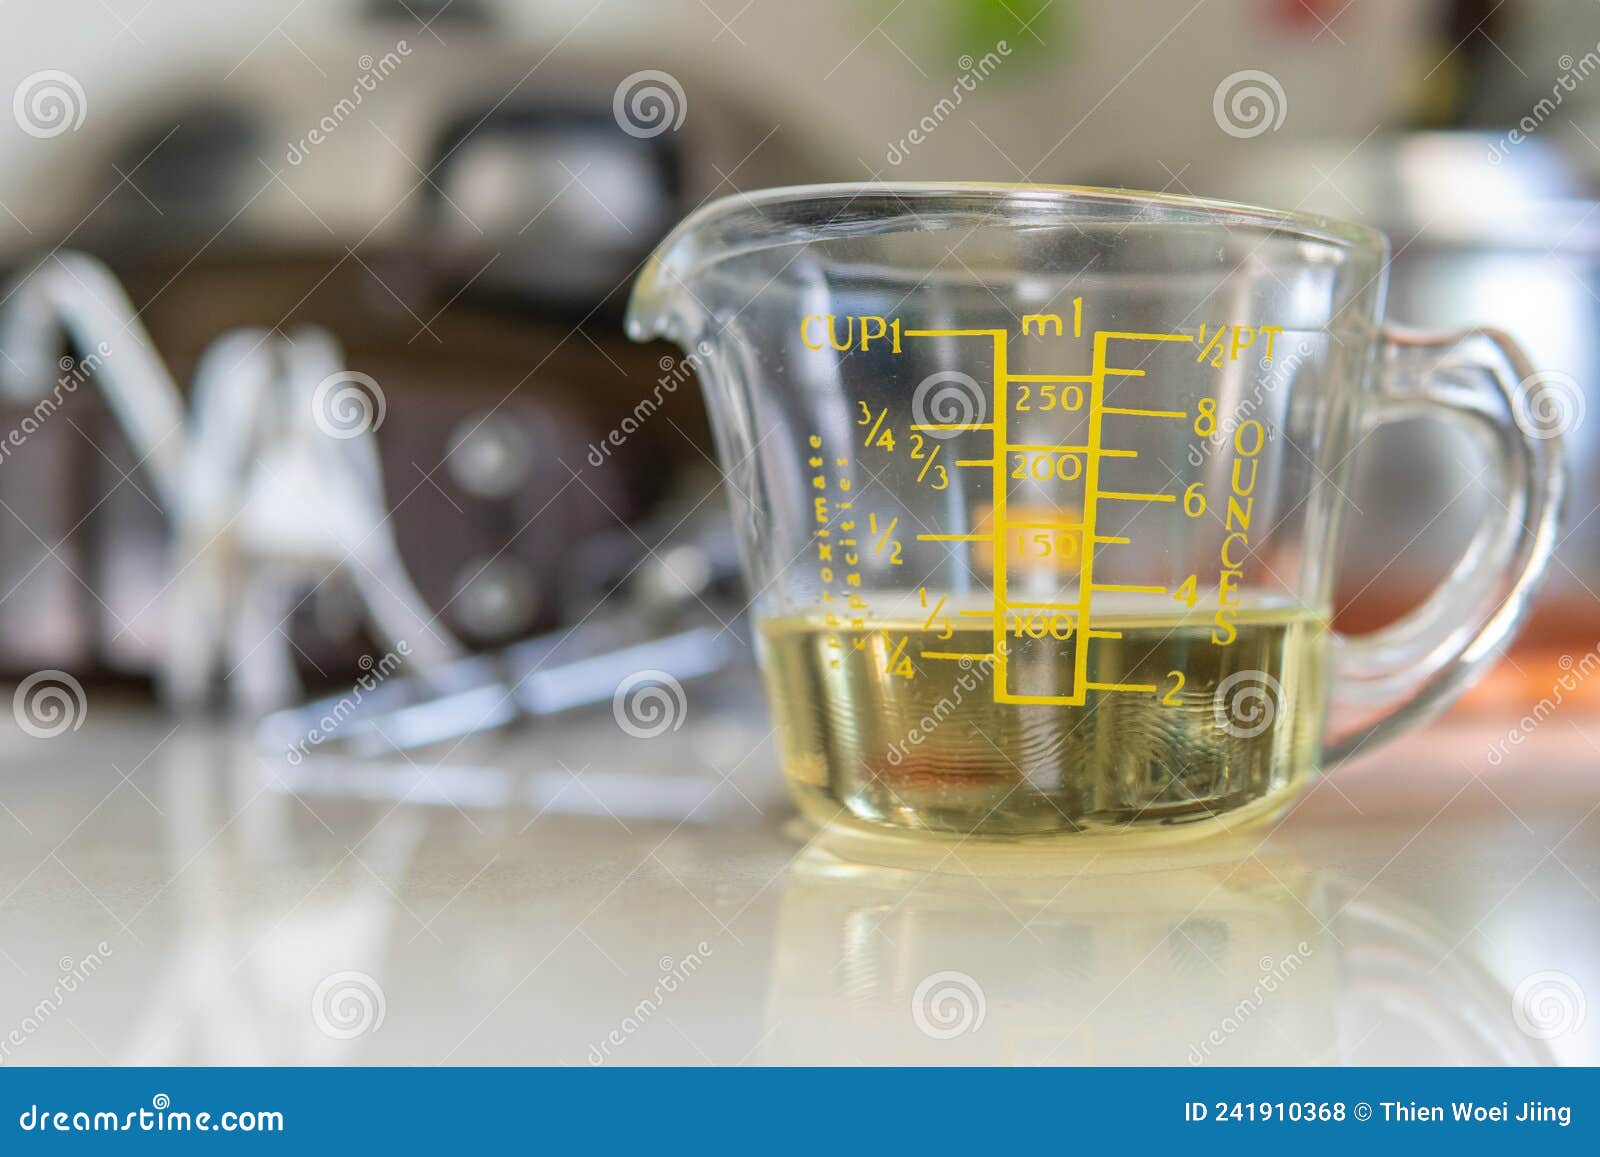 https://thumbs.dreamstime.com/z/cooking-oil-measuring-cup-baking-use-241910368.jpg